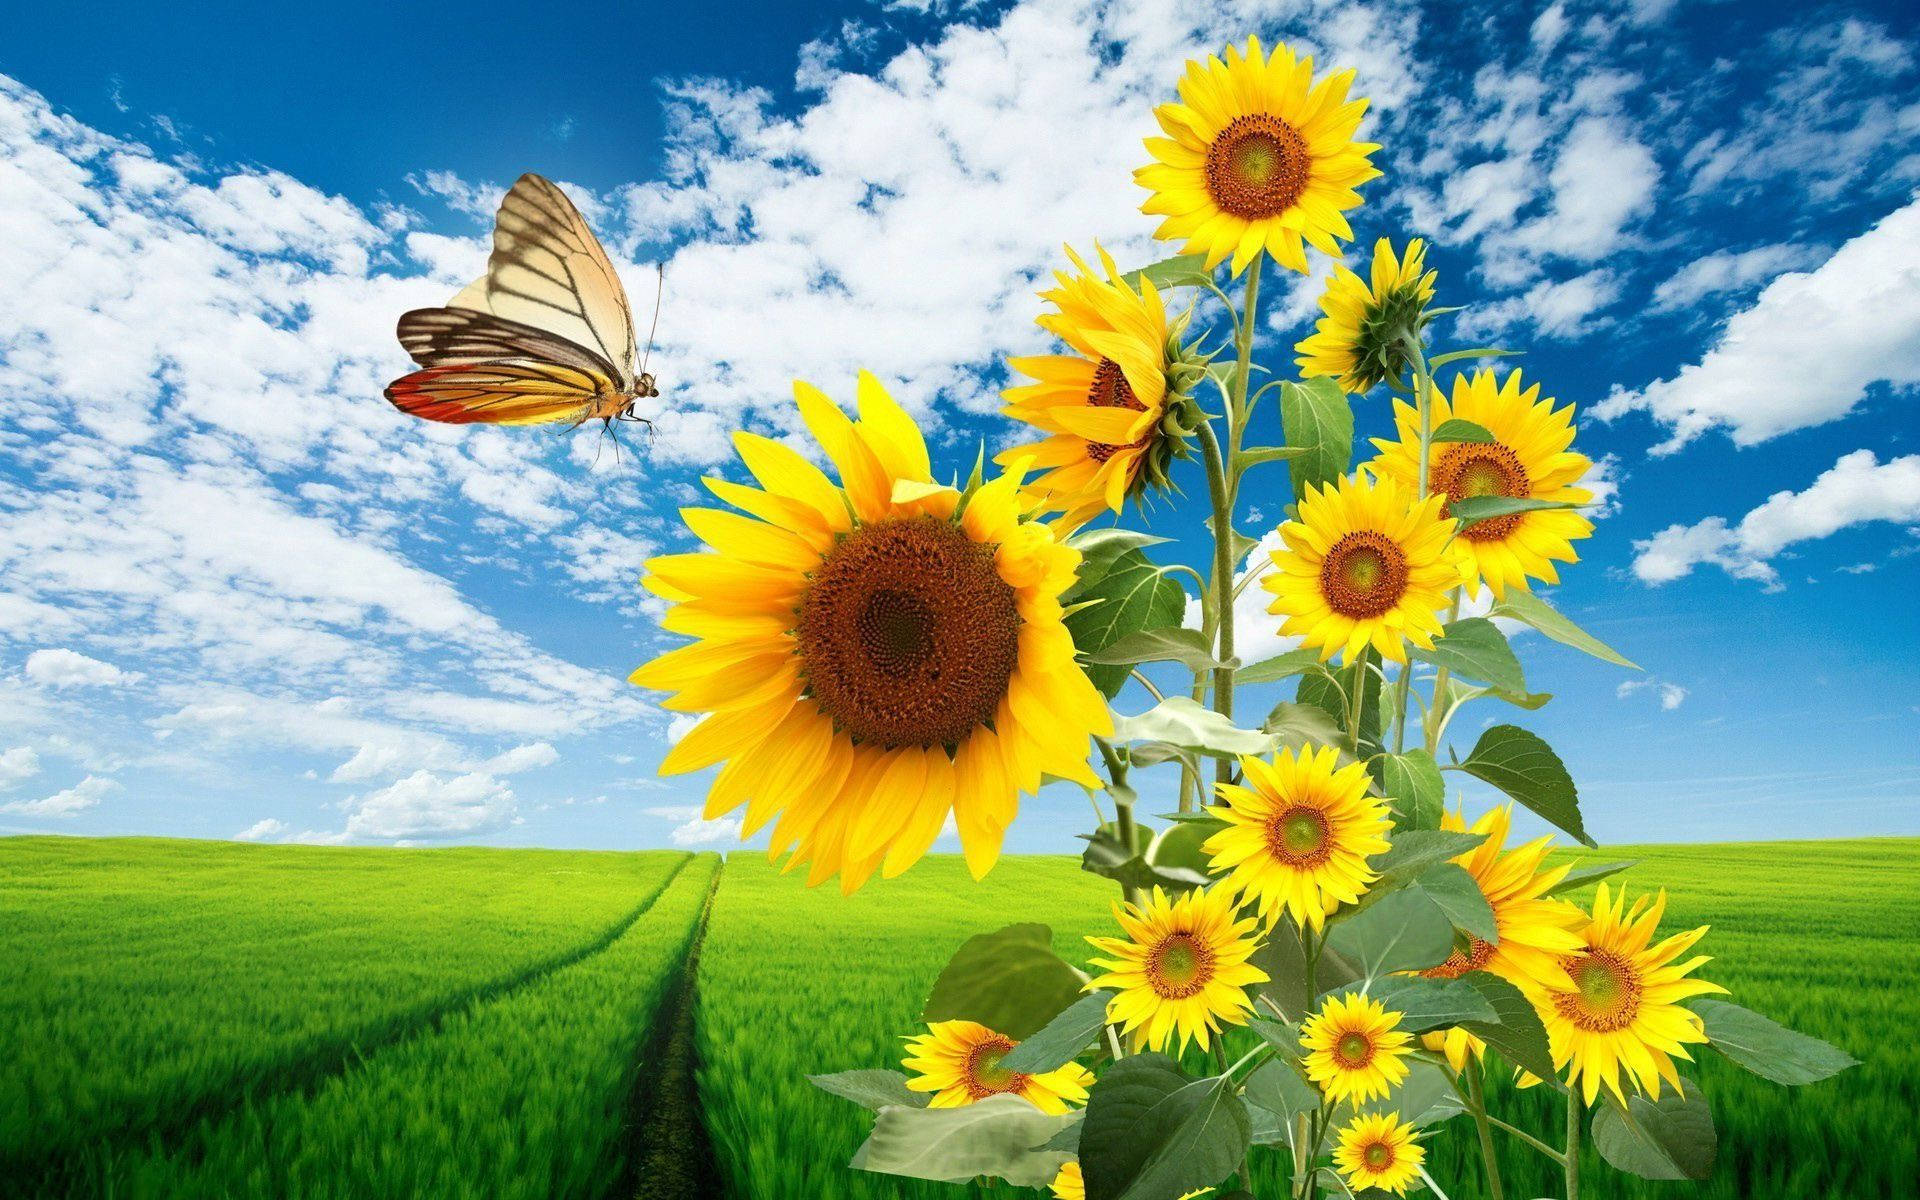 Free Sunflower Wallpaper Downloads, [200+] Sunflower Wallpapers for FREE |  